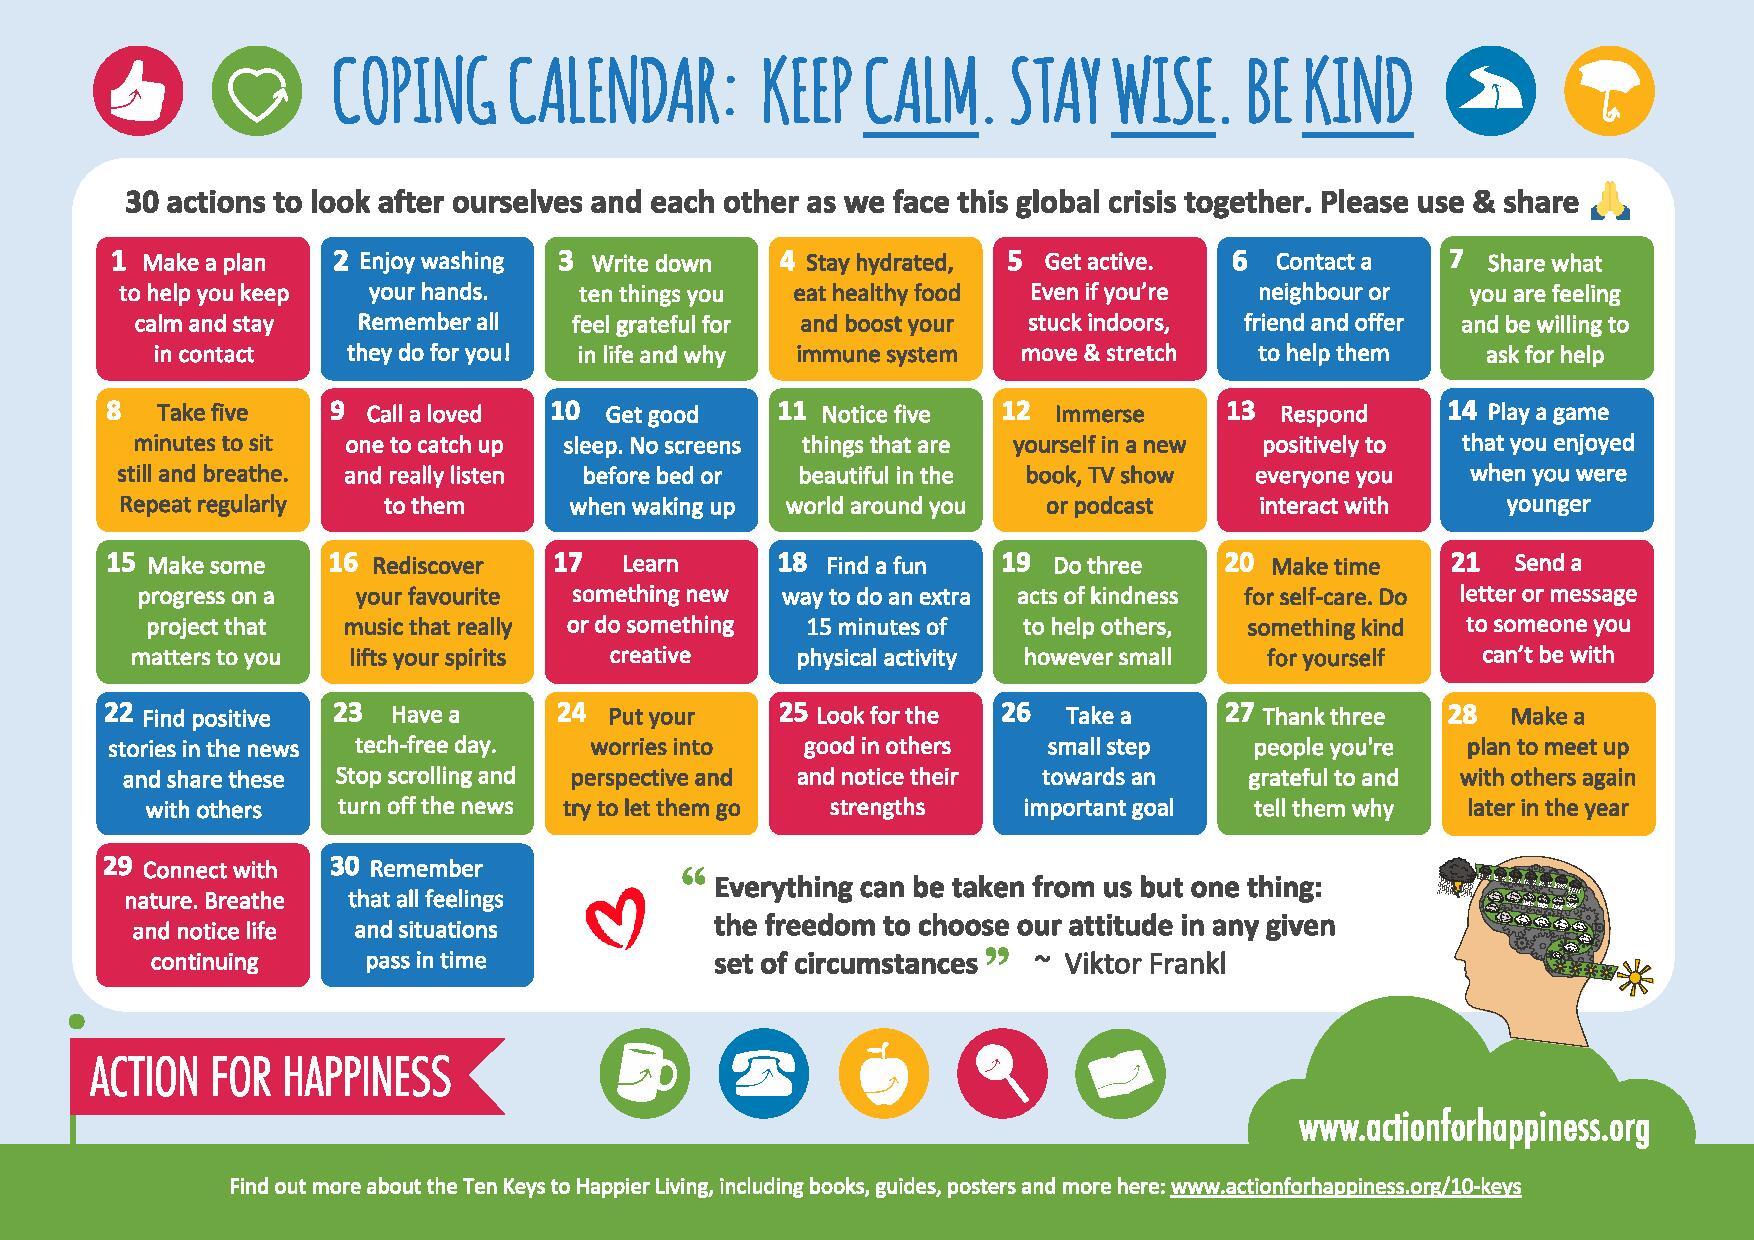 Coping calendar Keep calm Stay wise Be kind from Action for Happiness